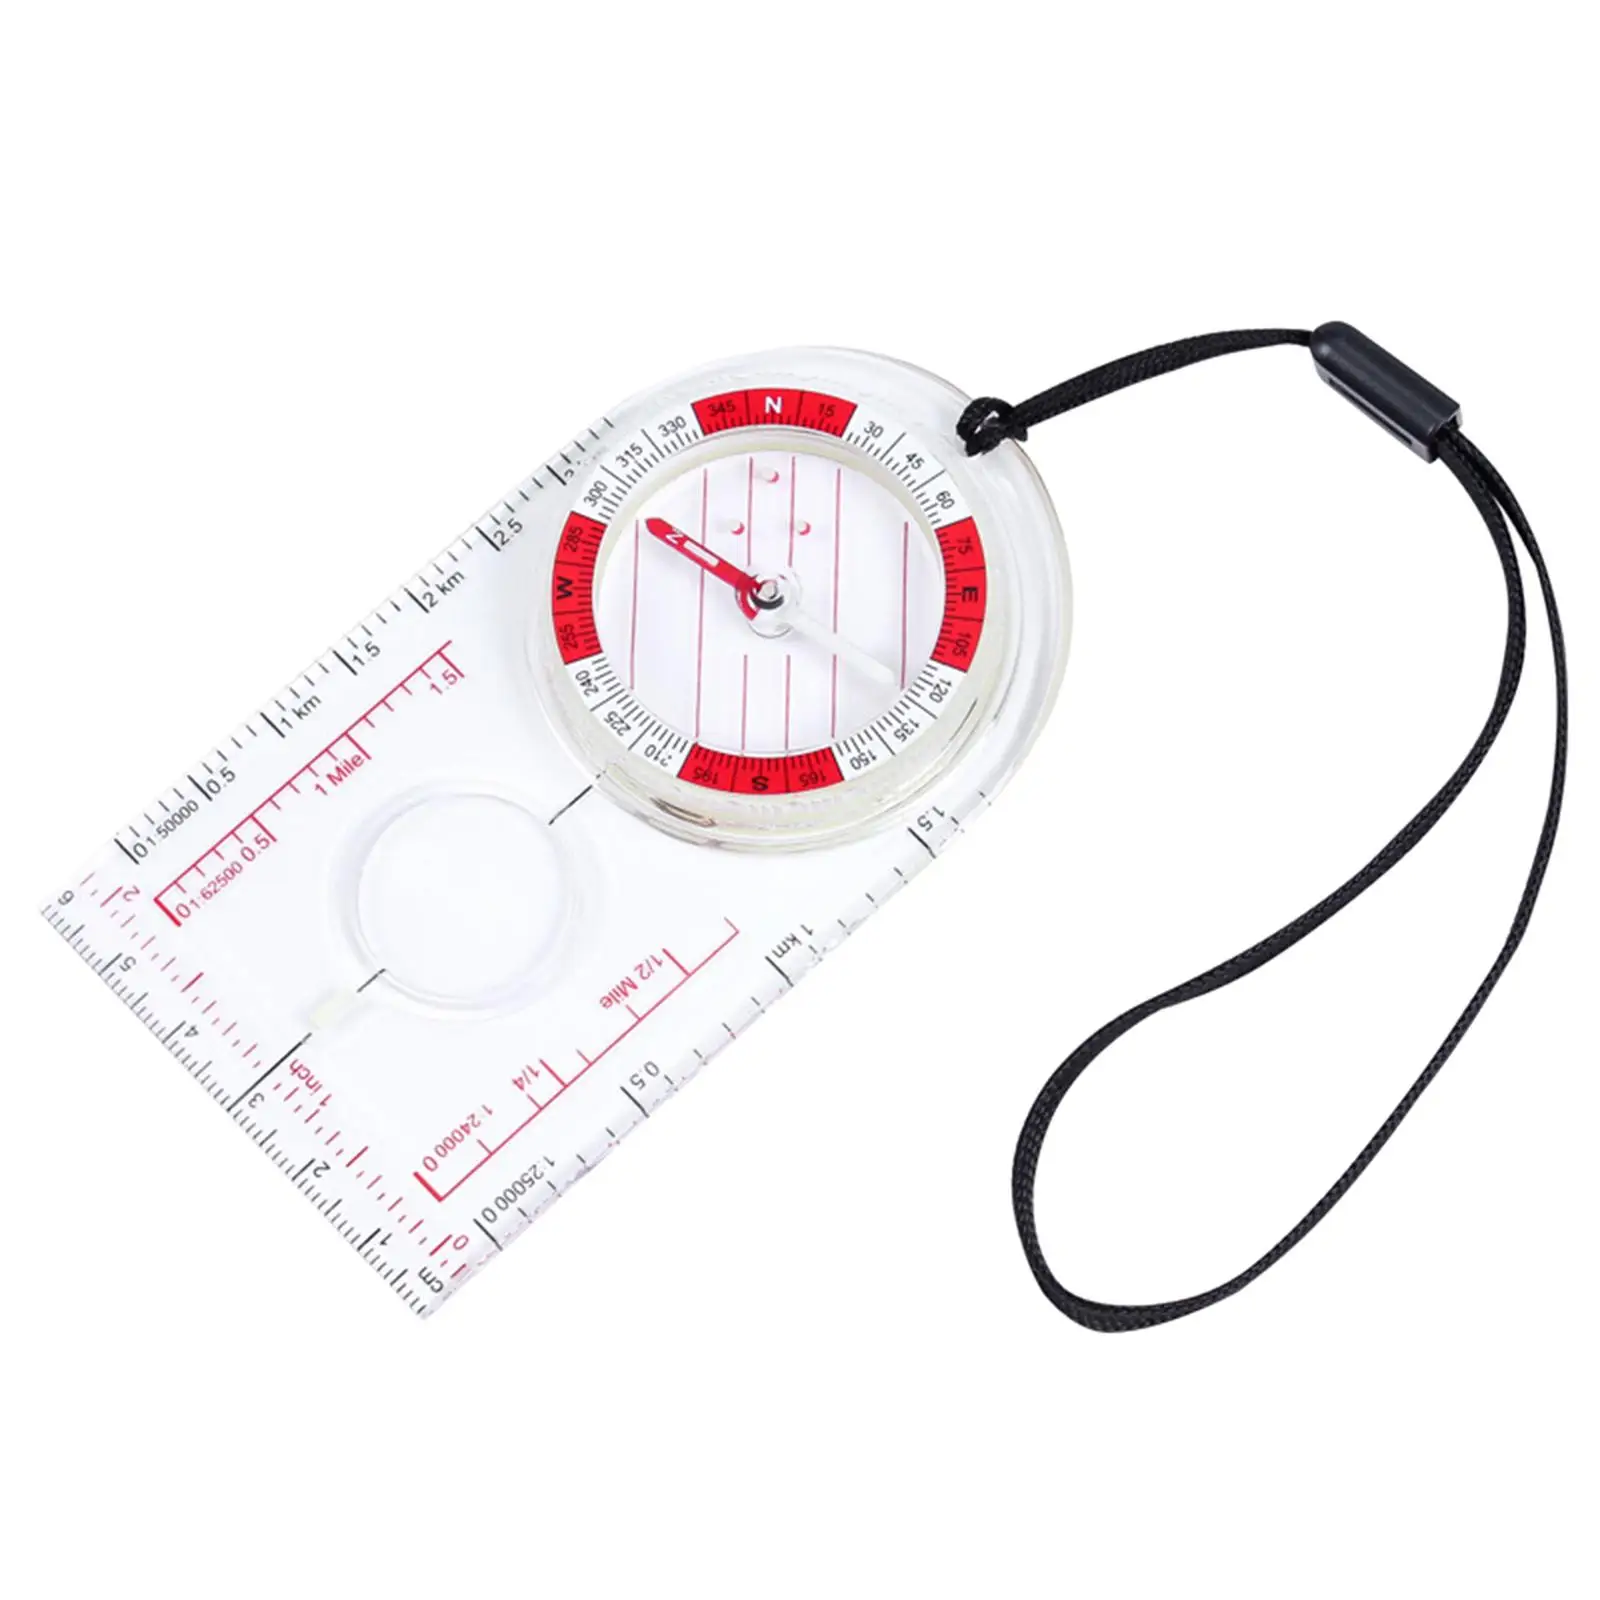 Orienteering Compass with Scale Lanyard Movement Strong Outdoor Luminous Compass for Camping Backpacking Reading